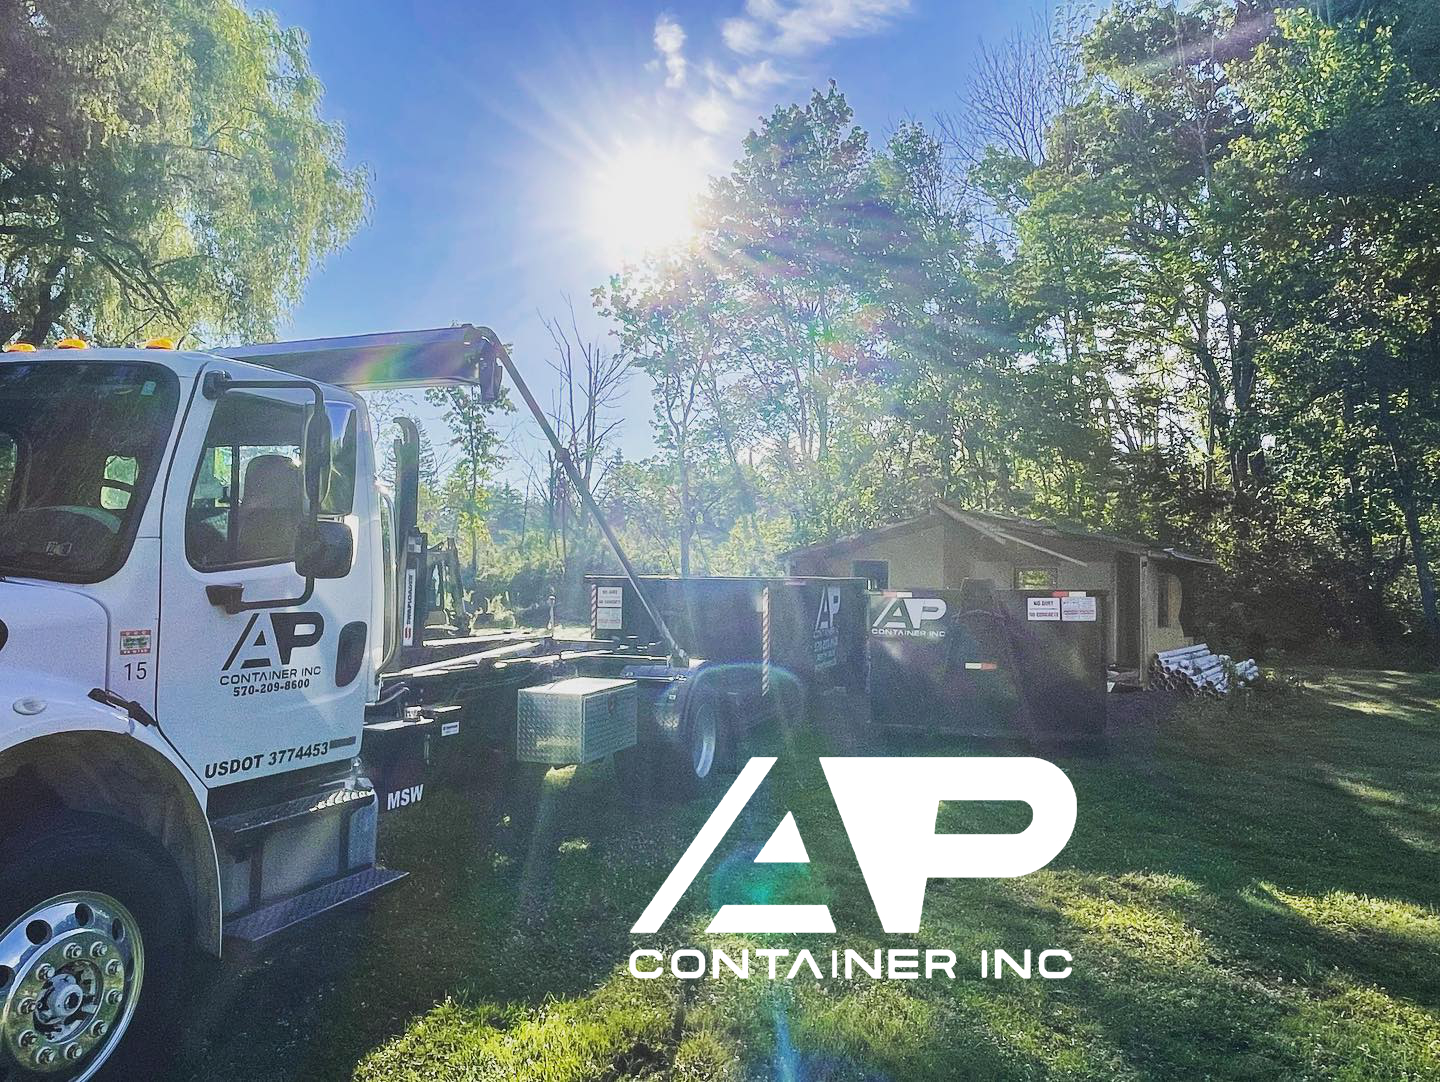 Commercial Dumpster Rental AP Container Pittston PA